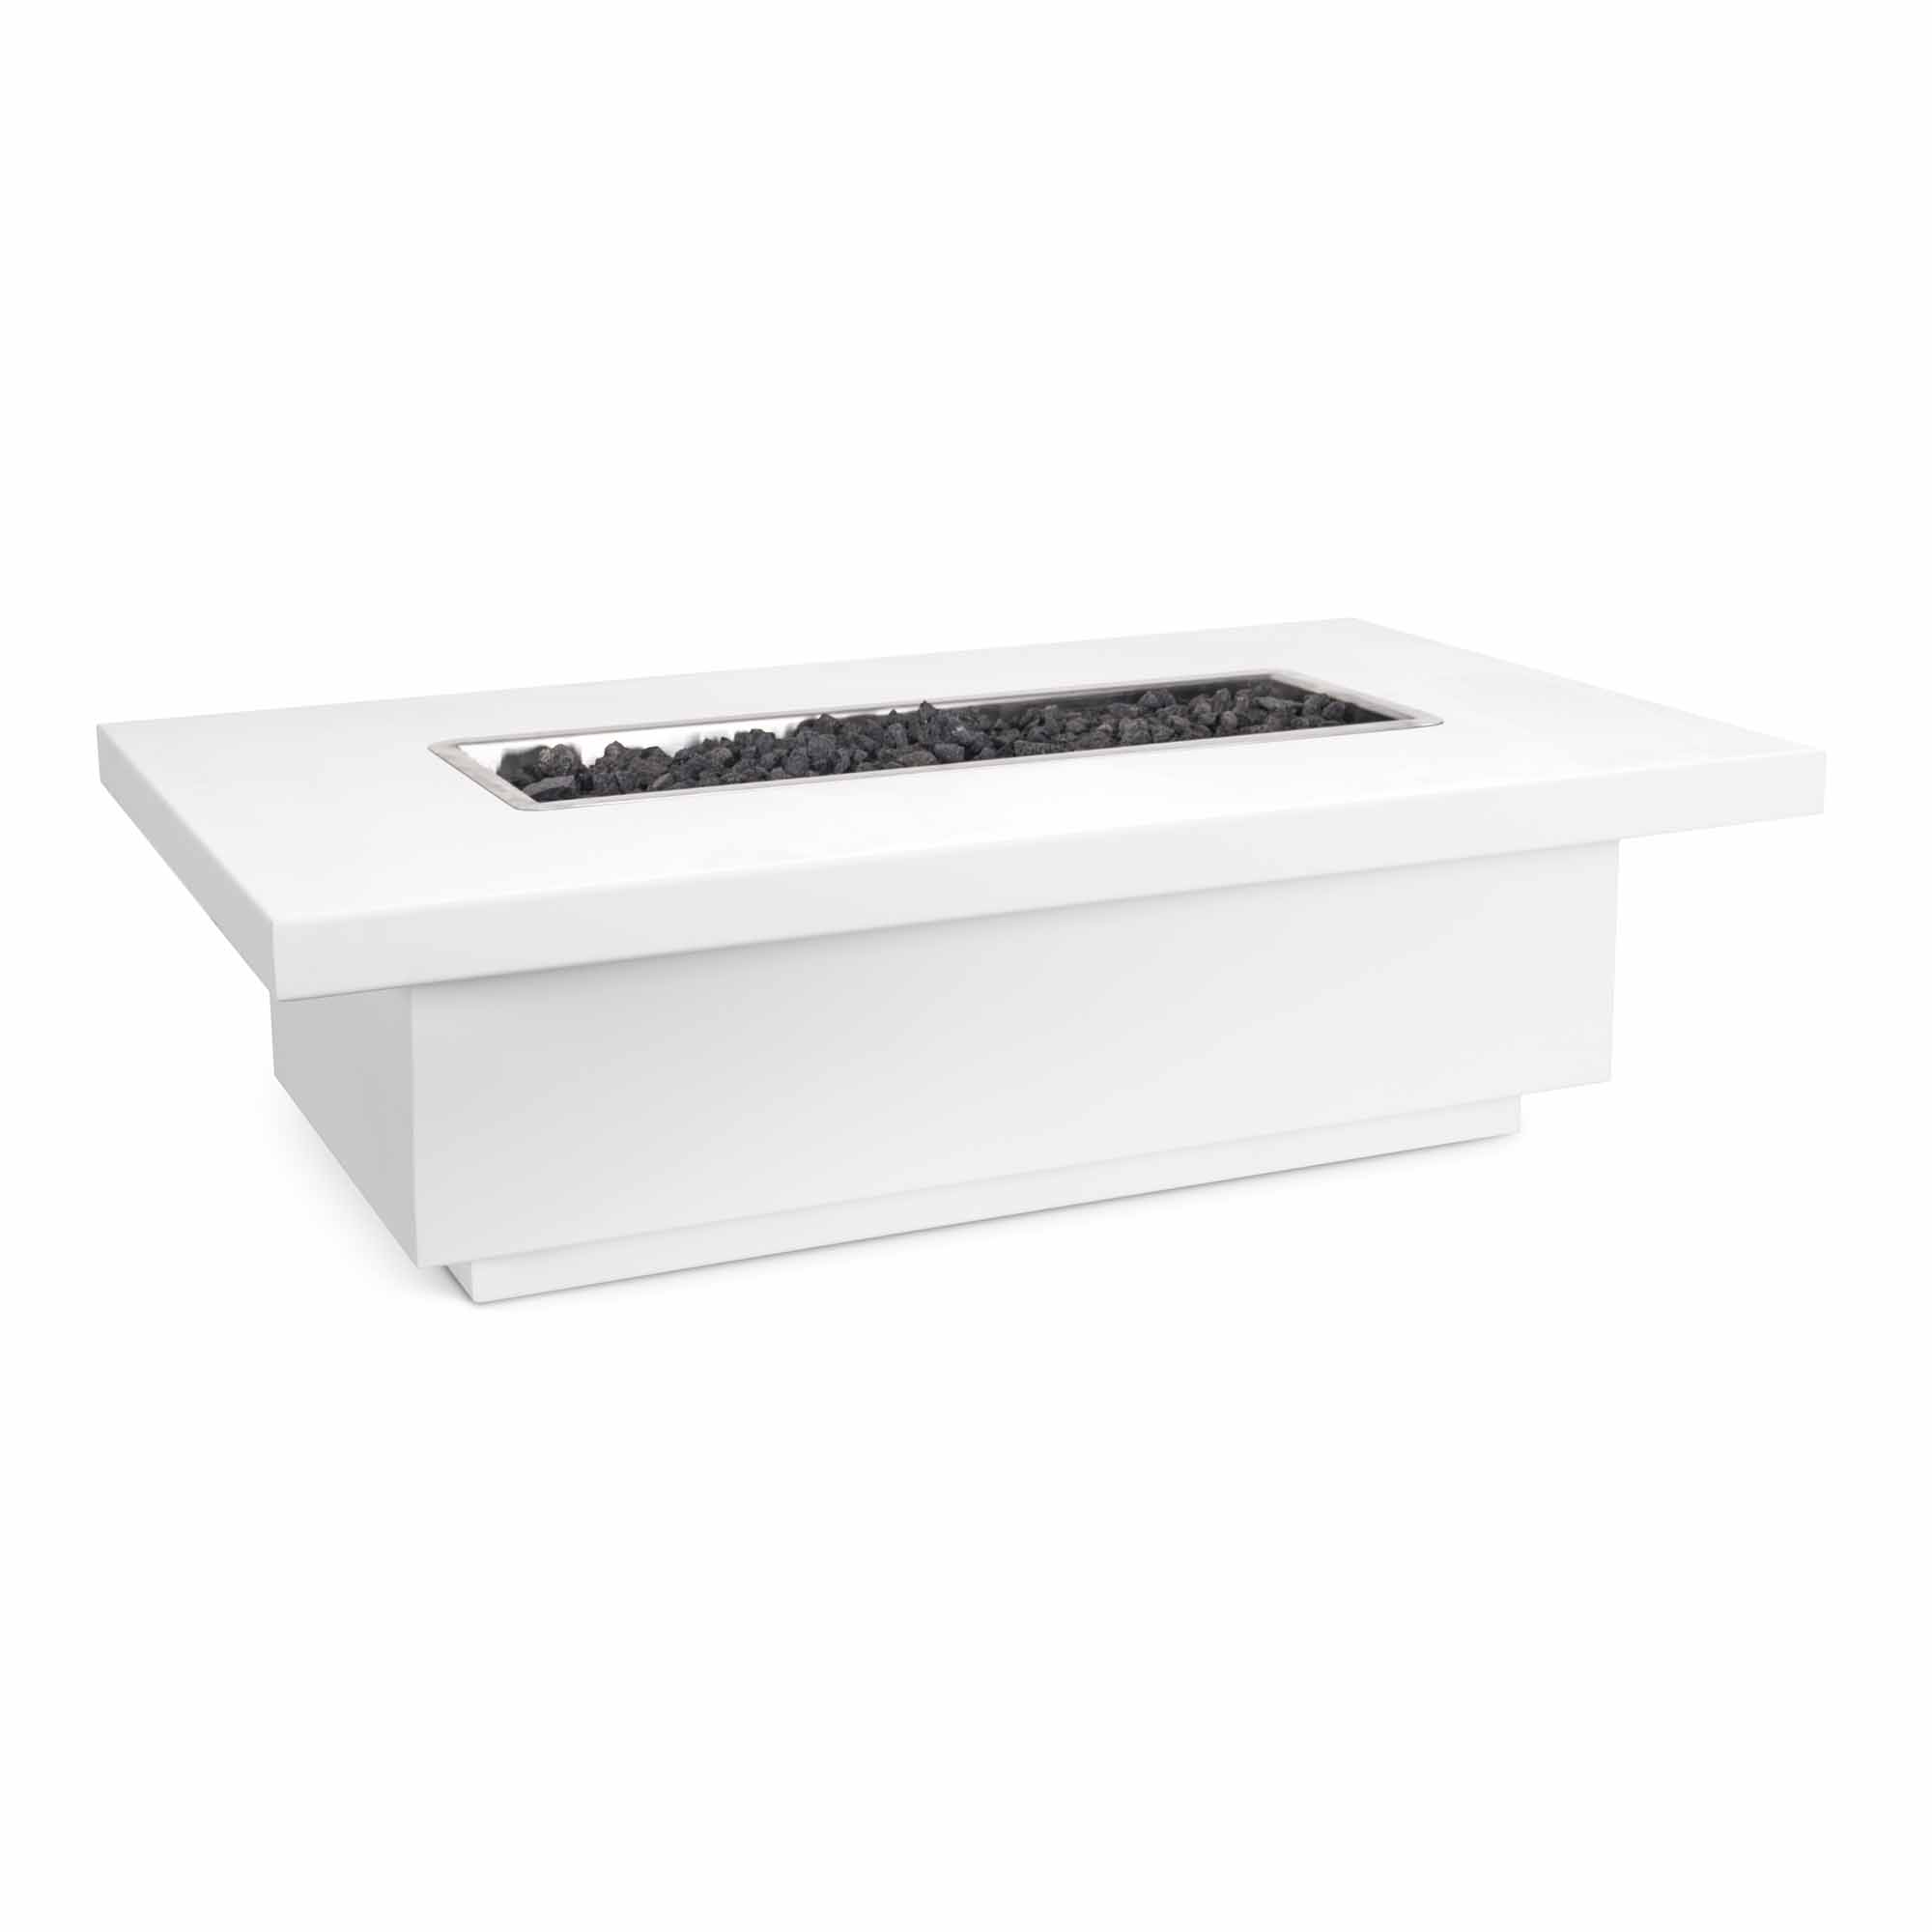 Fremont Fire Table - White - Low Profile